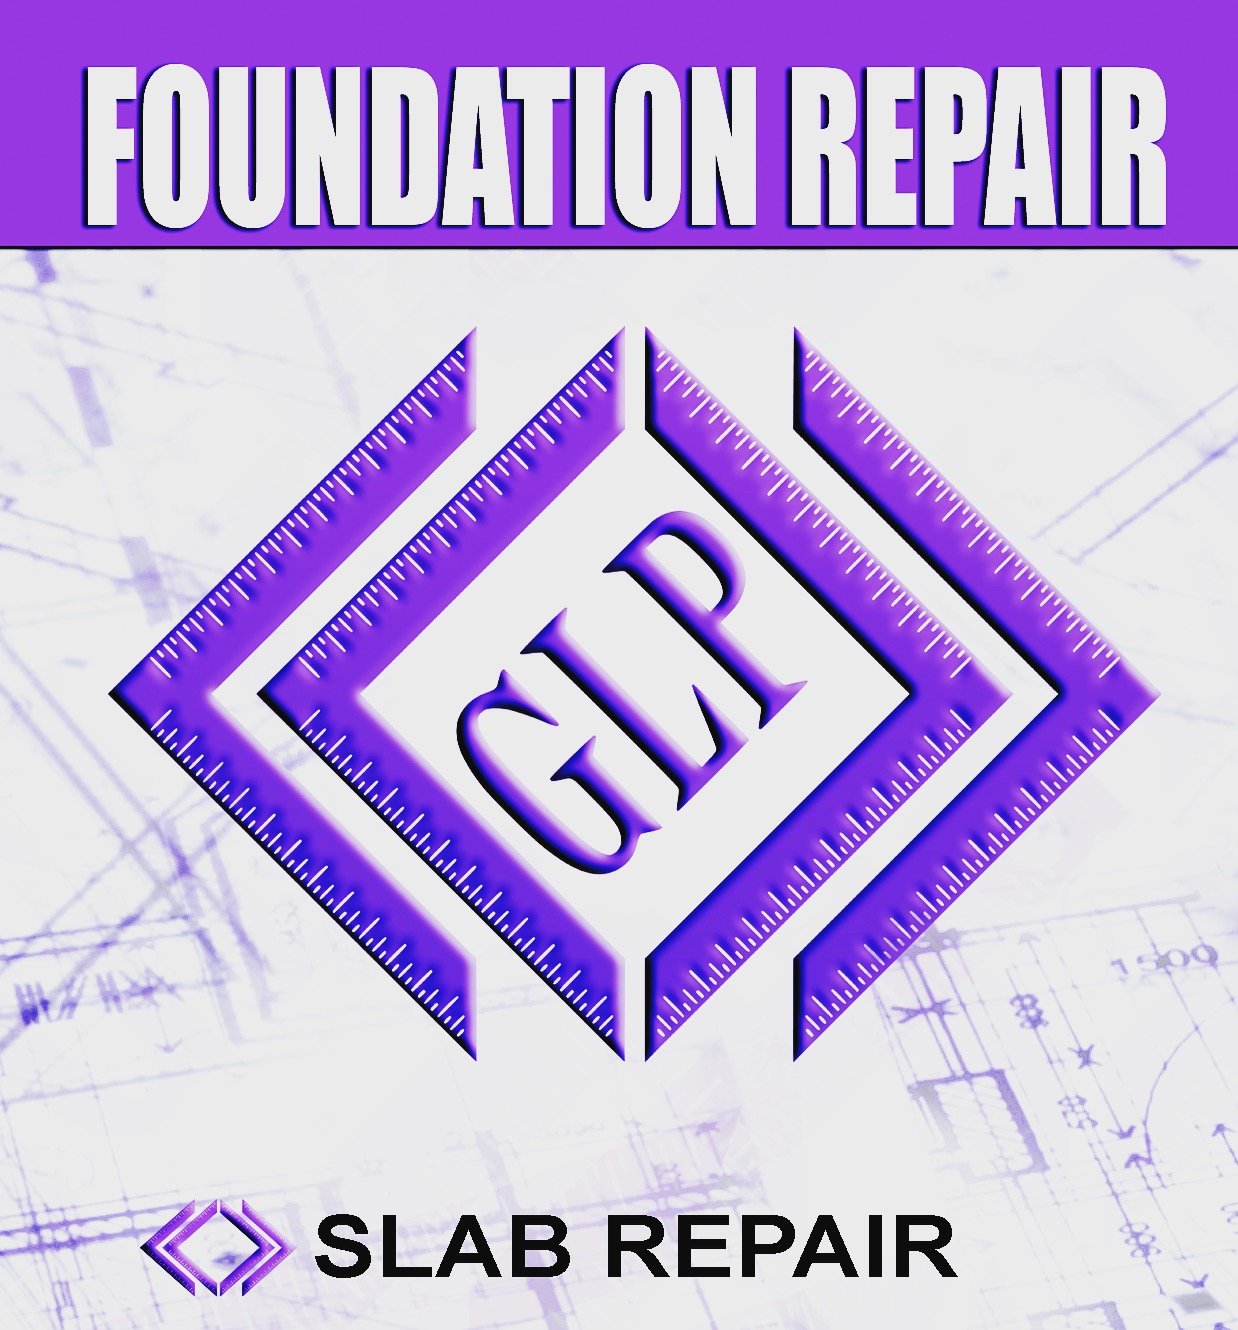 Pier and Beam, Slab Foundation Repair #FortWorth #Stephenville #DFW